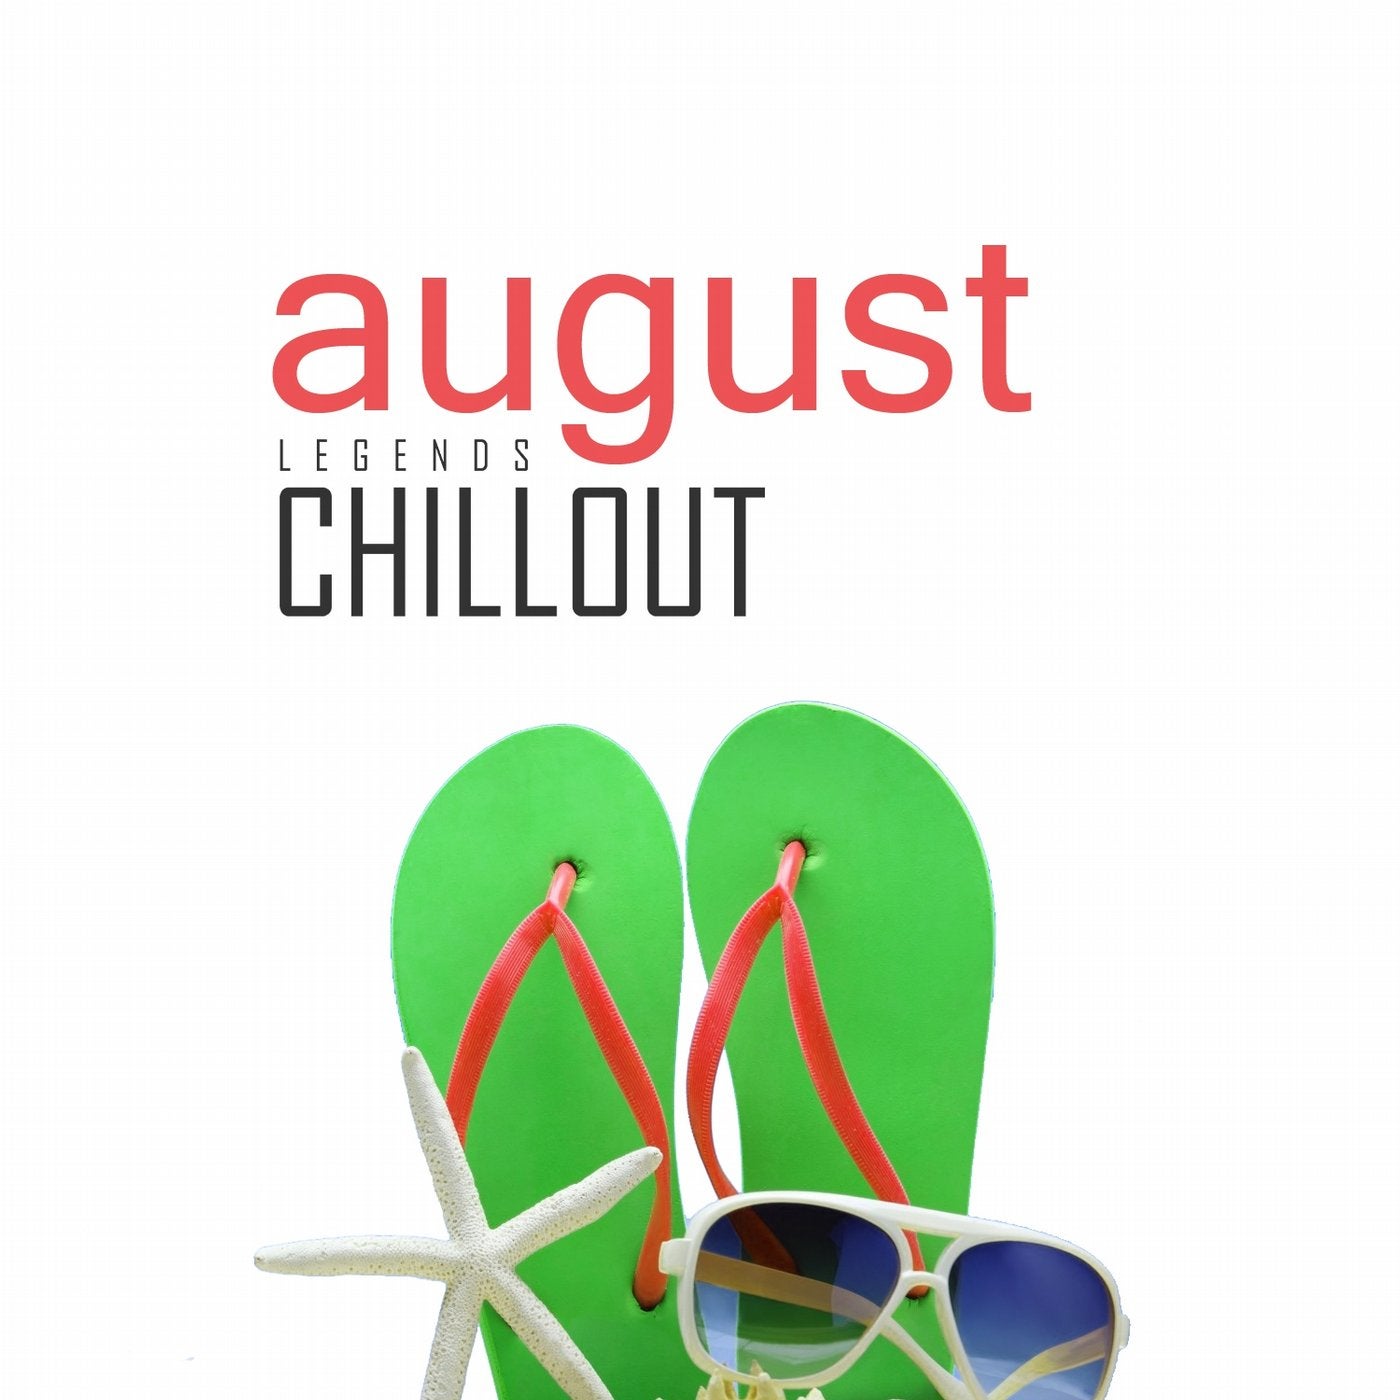 Chillout August 2017 - Top 10 Best of Collections